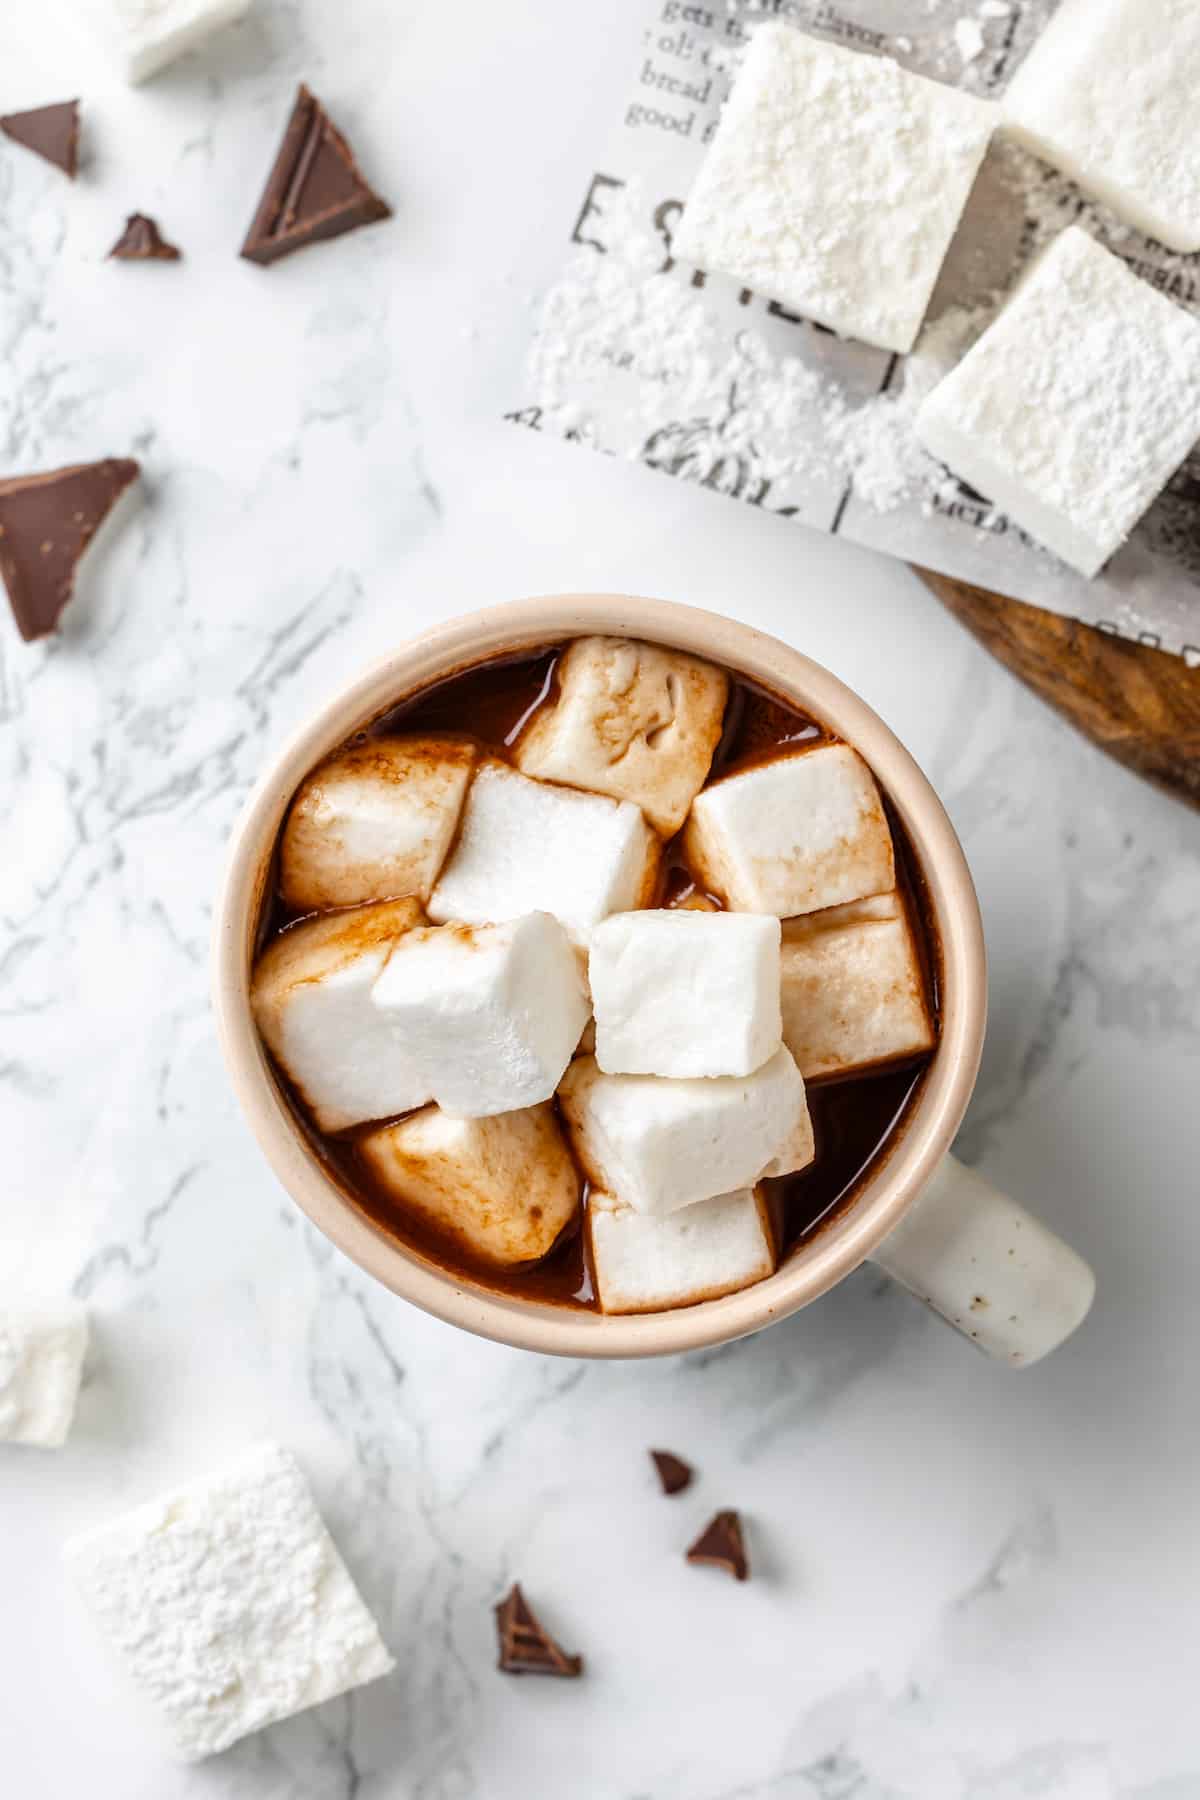 Overhead view of hot chocolate in mug with vegan marshmallows